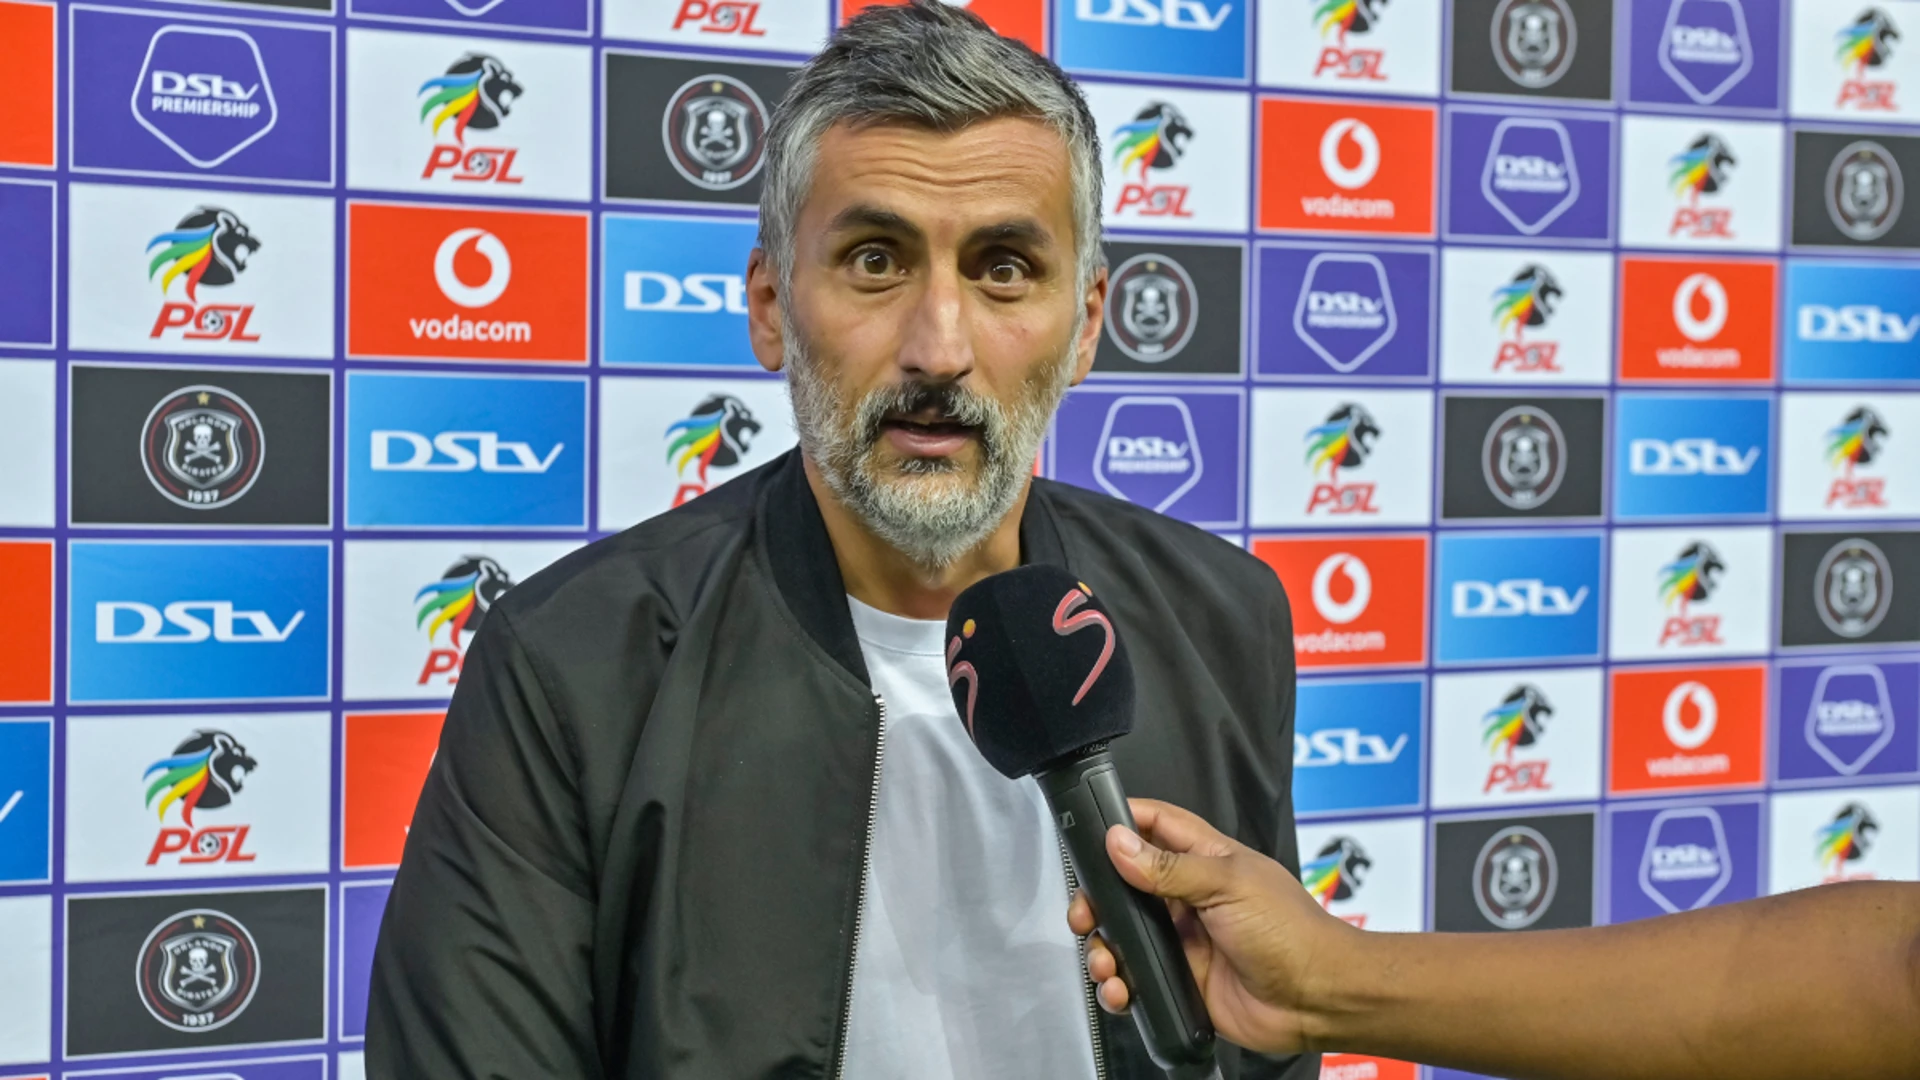 Pirates eyeing all three points against Rise And Shine